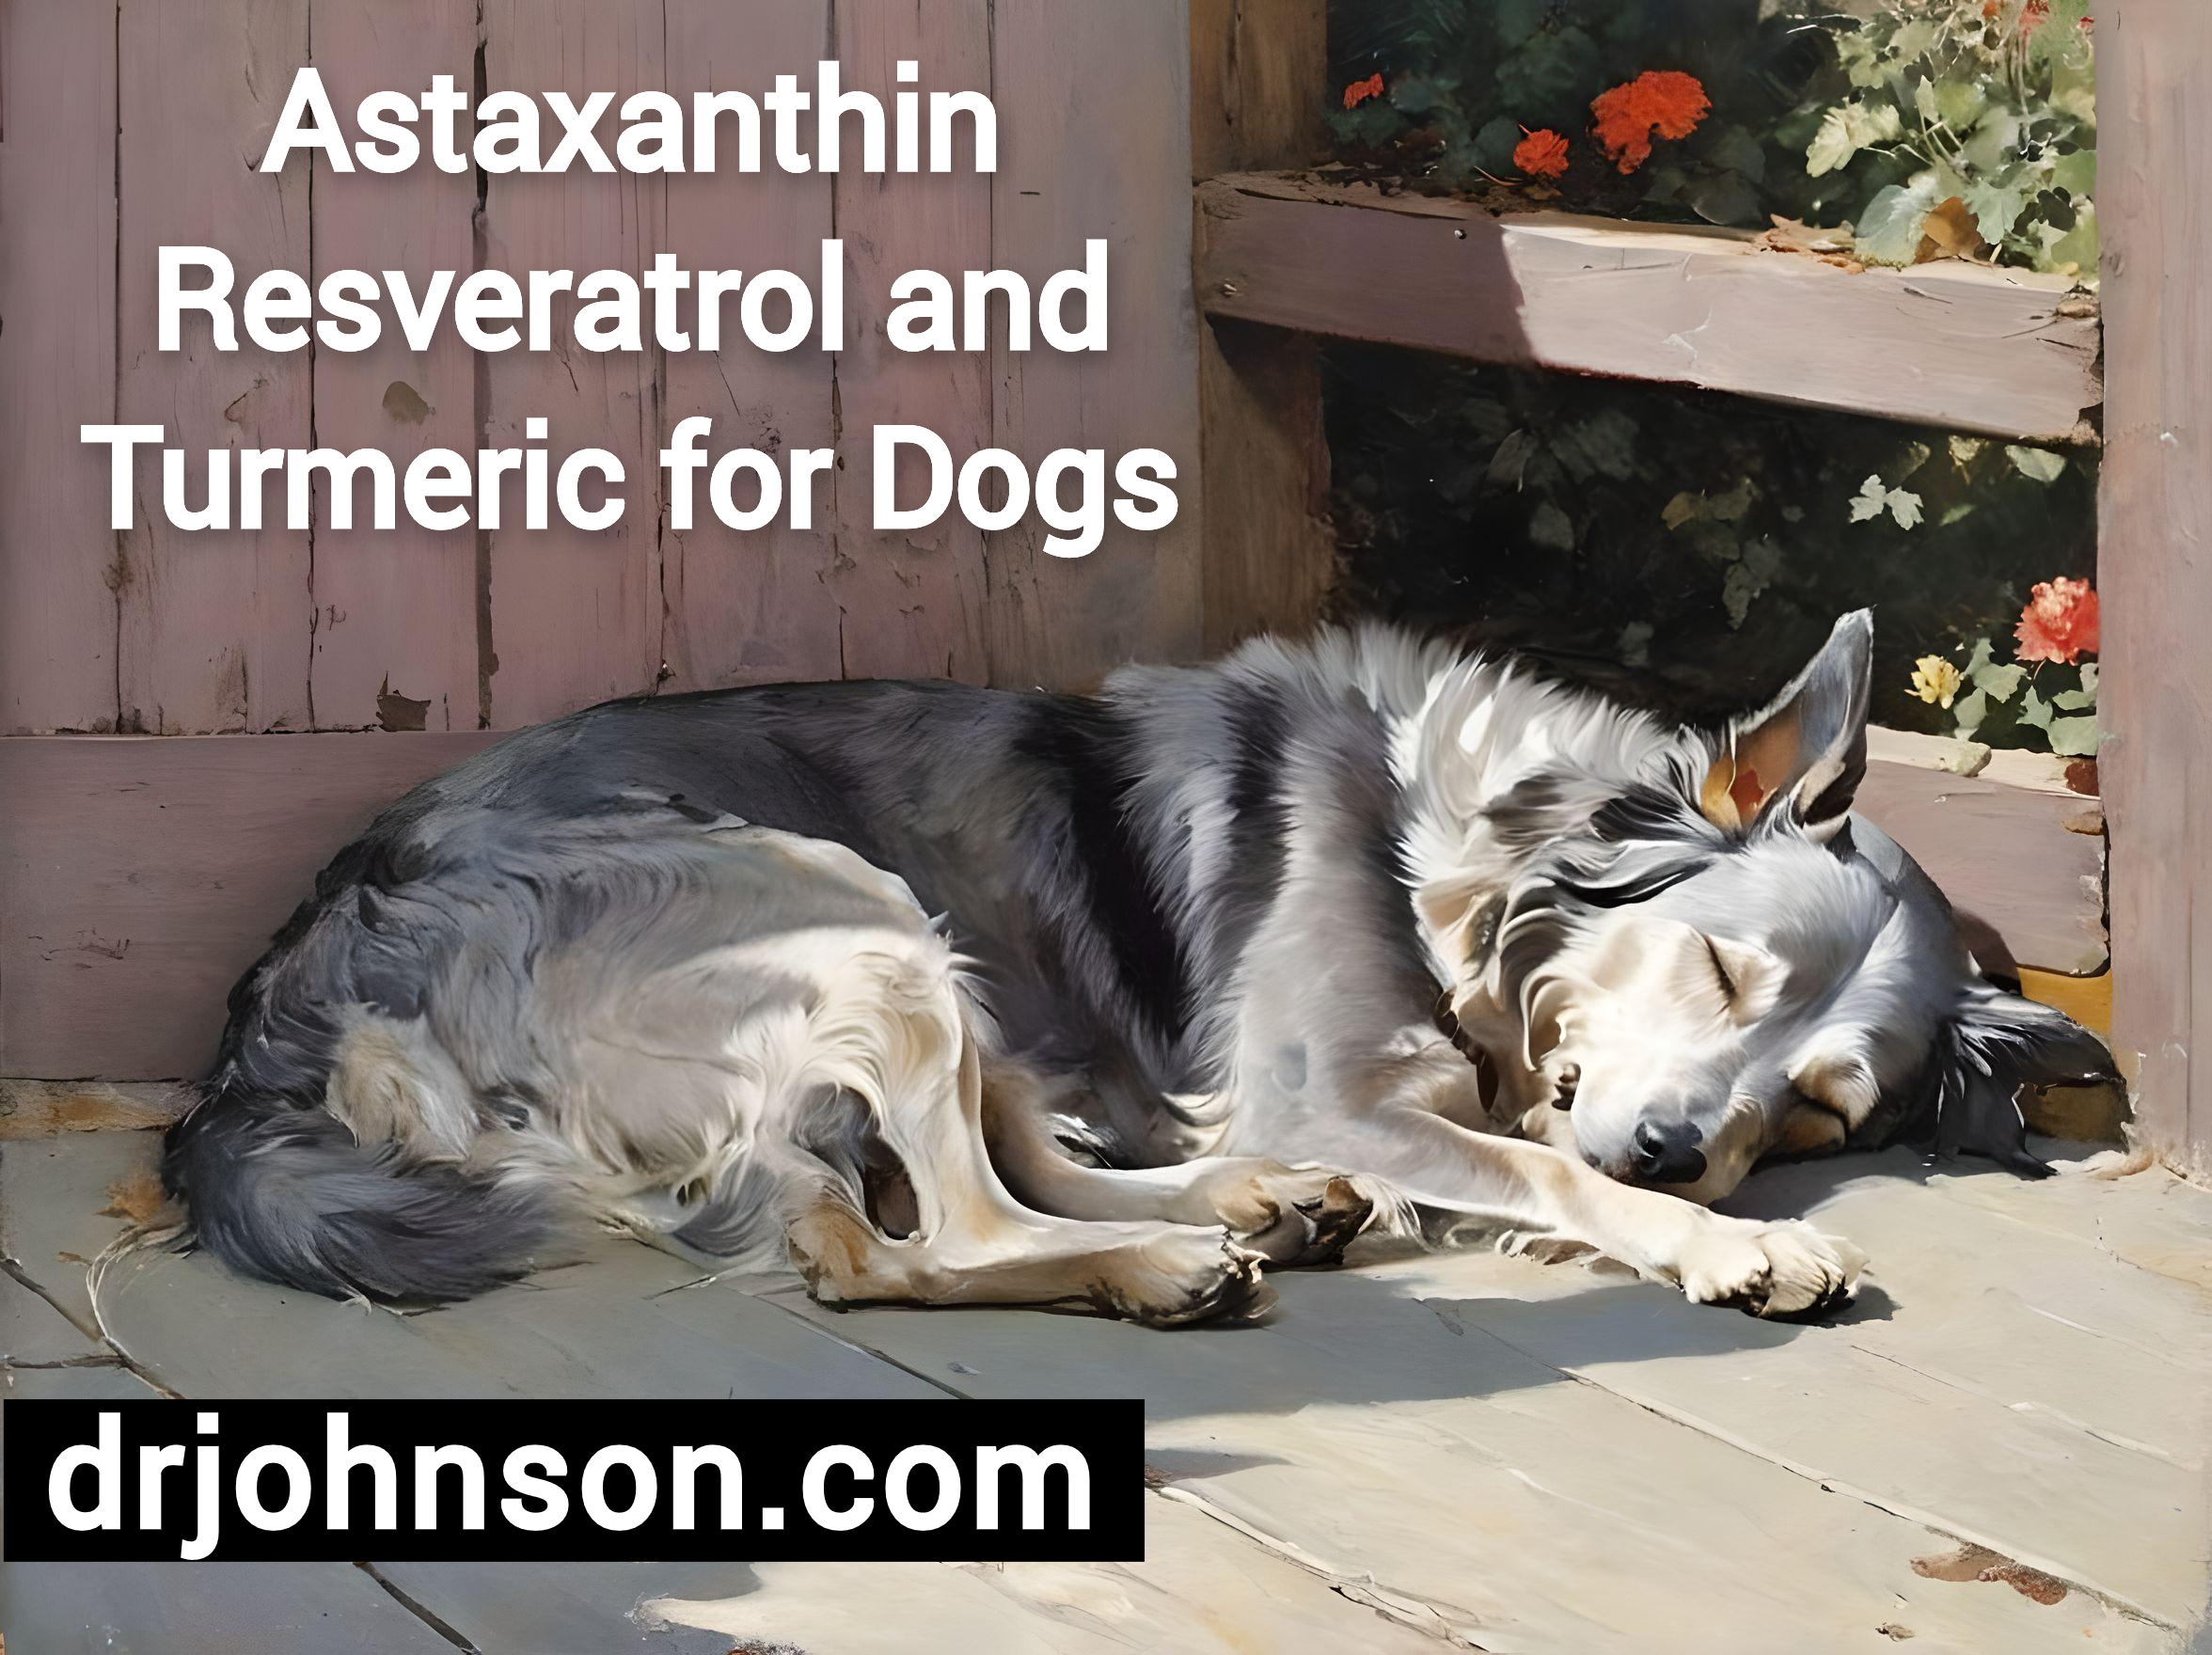 Astaxanthin, Resveratrol, and Turmeric for Dogs